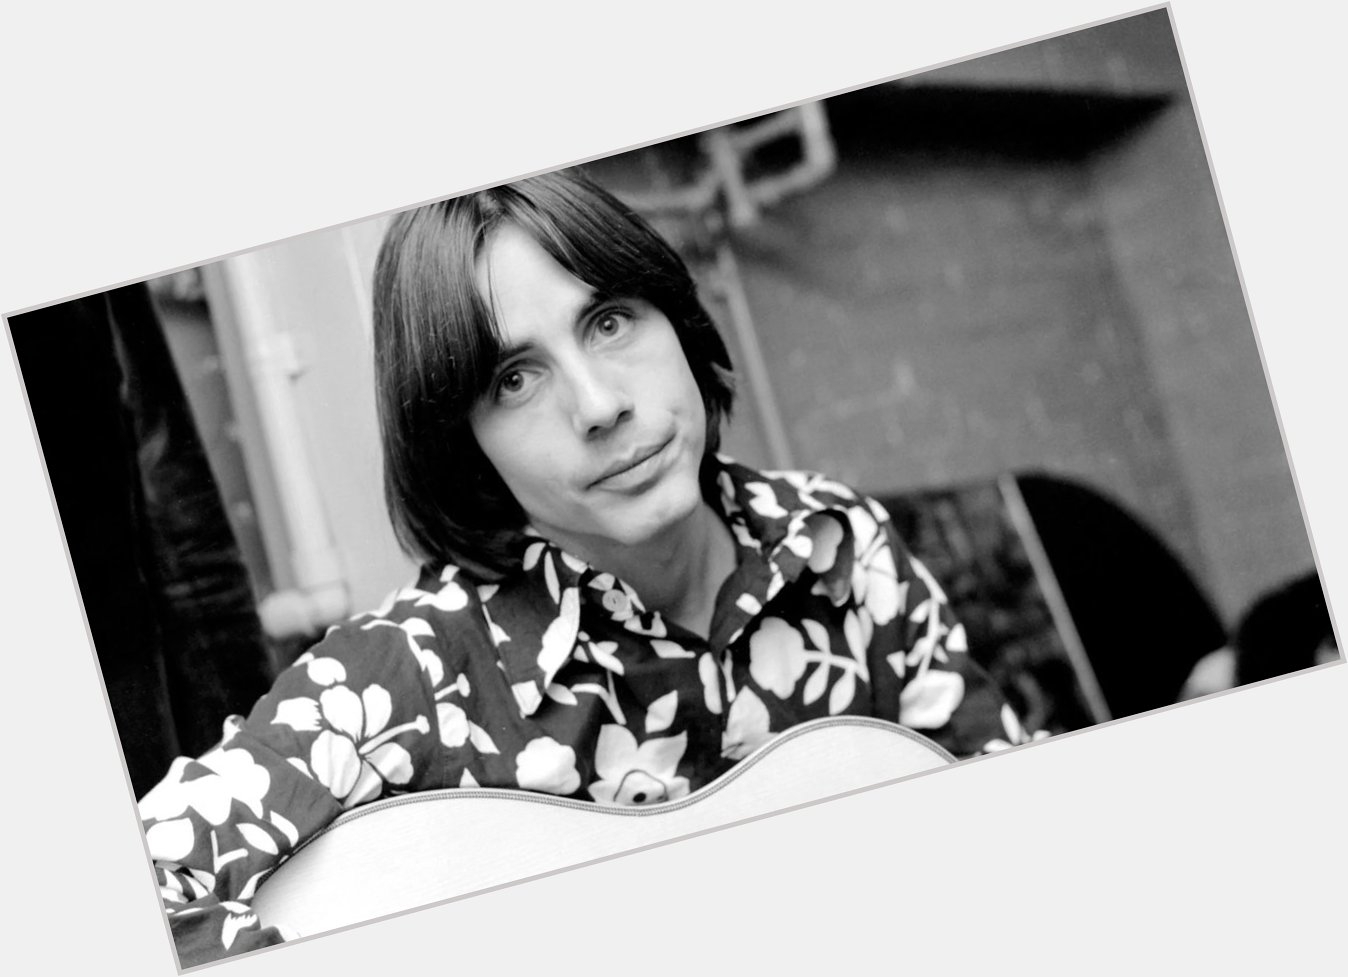  I love Jackson Browne and have loved his music since the 70s Happy Birthday 